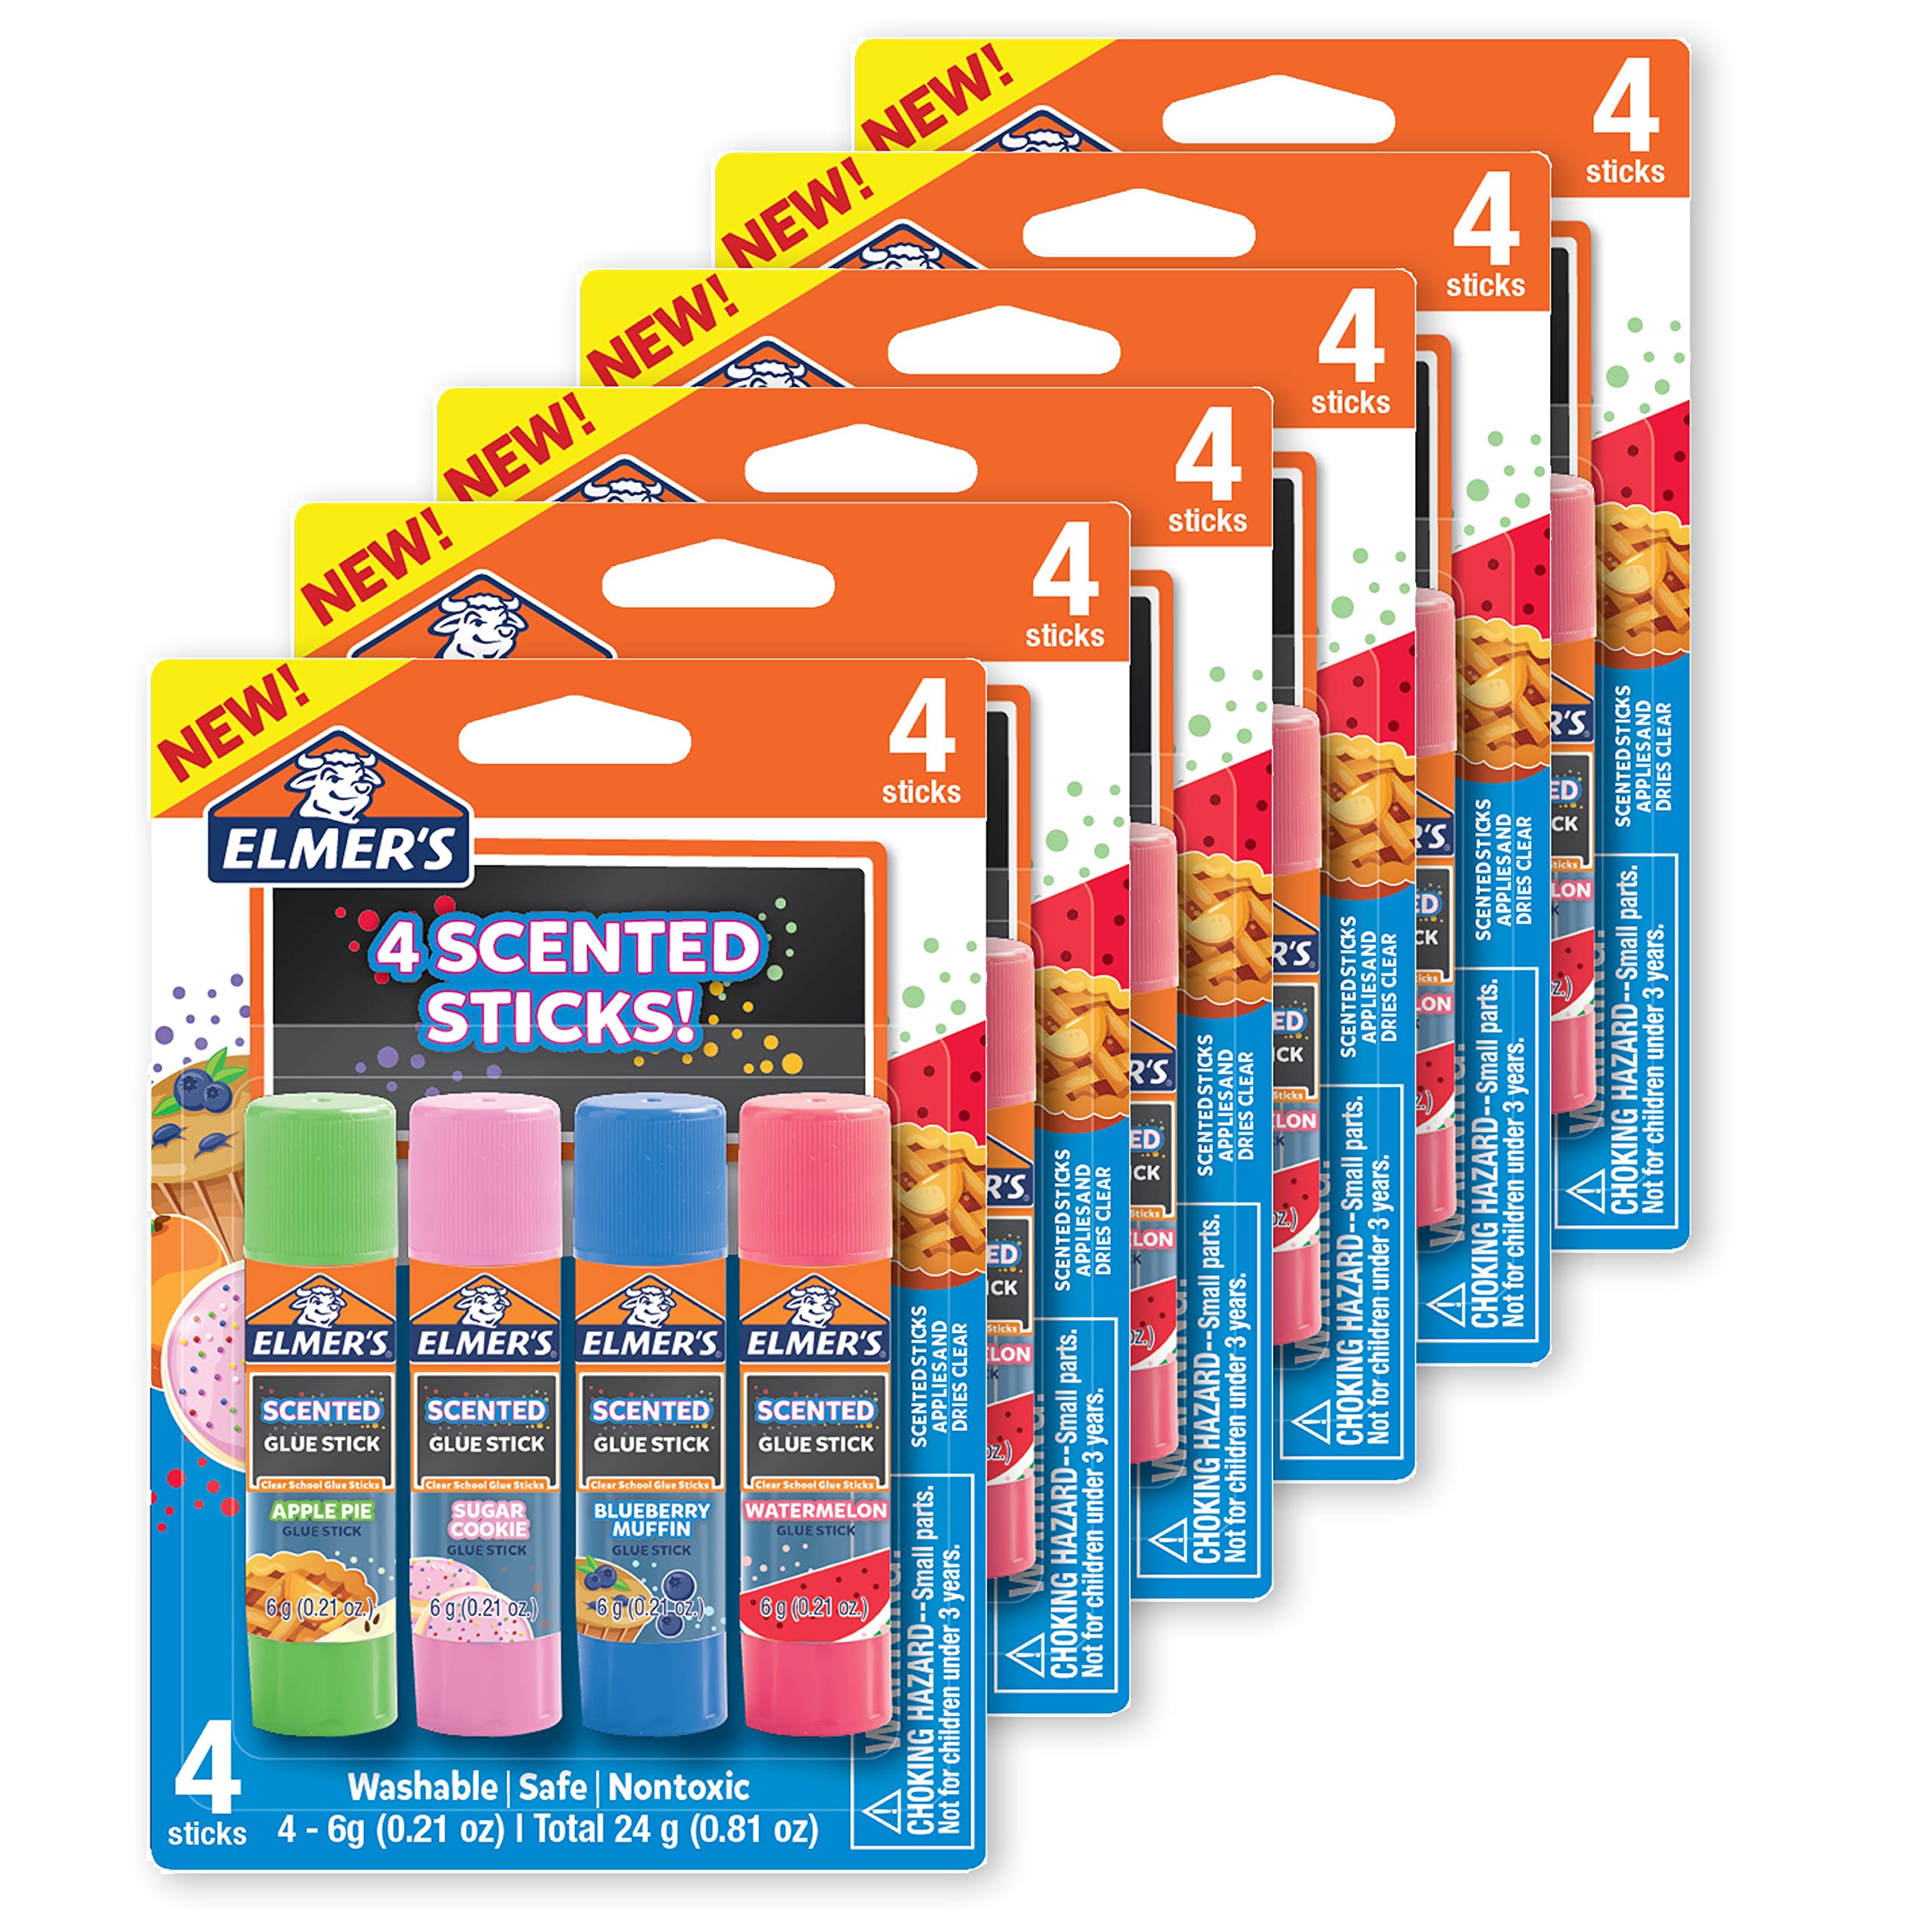 $7.29 Elmer’s Scented Glue Sticks, Washable, Clear, Assorted Scents, 6 Grams, 6 Packs of 4 (24 Total Count) free shipping with Subscribe & Save